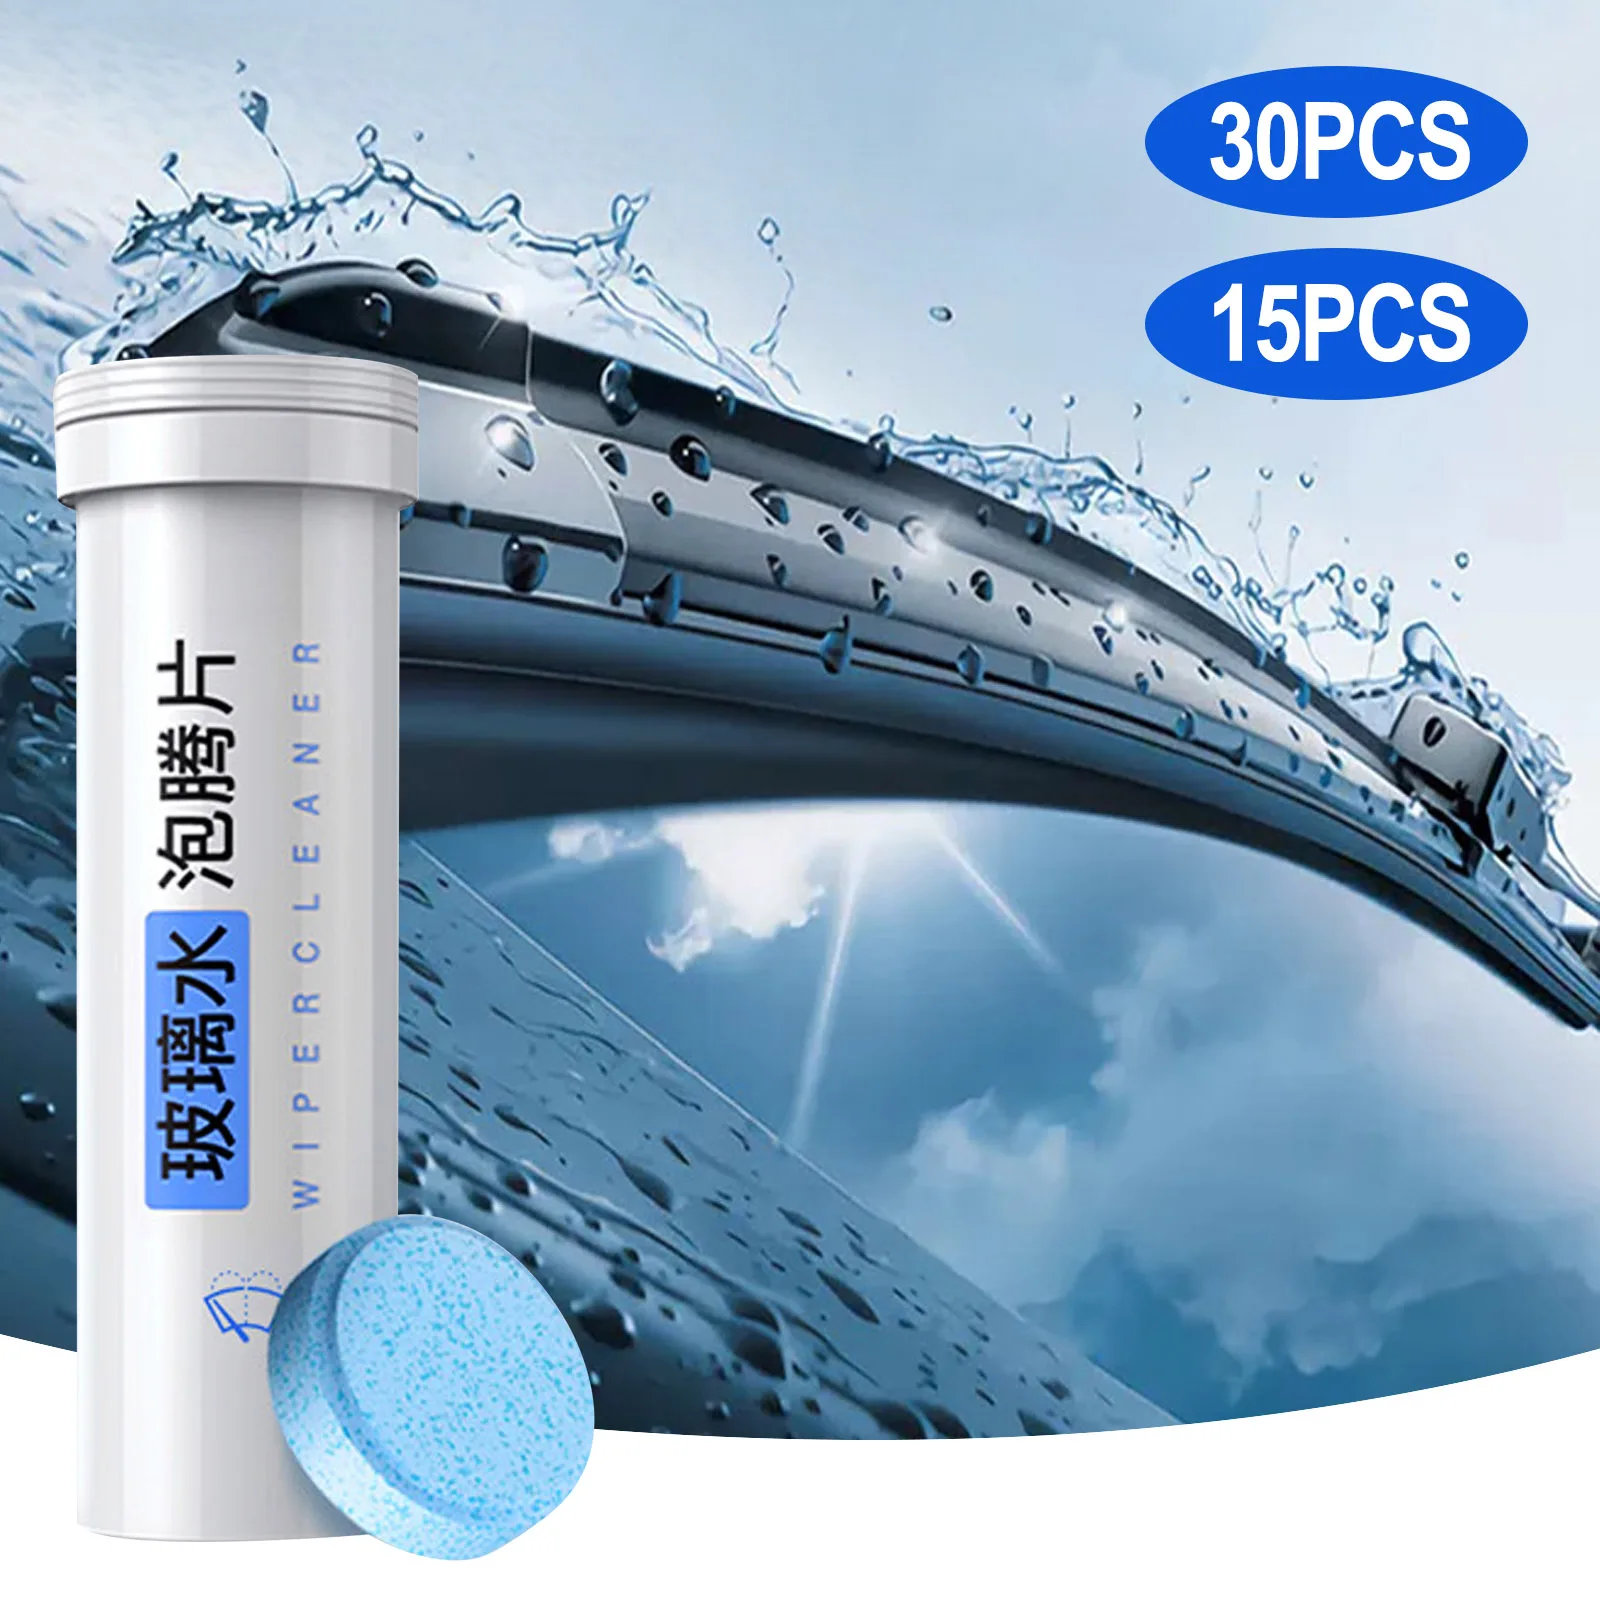 

Car Solid Cleaner Effervescent Tablets Spray Cleaner Car Window Windshield Glass Cleaning Auto Accessories 45PCS /15PCS/30PCS